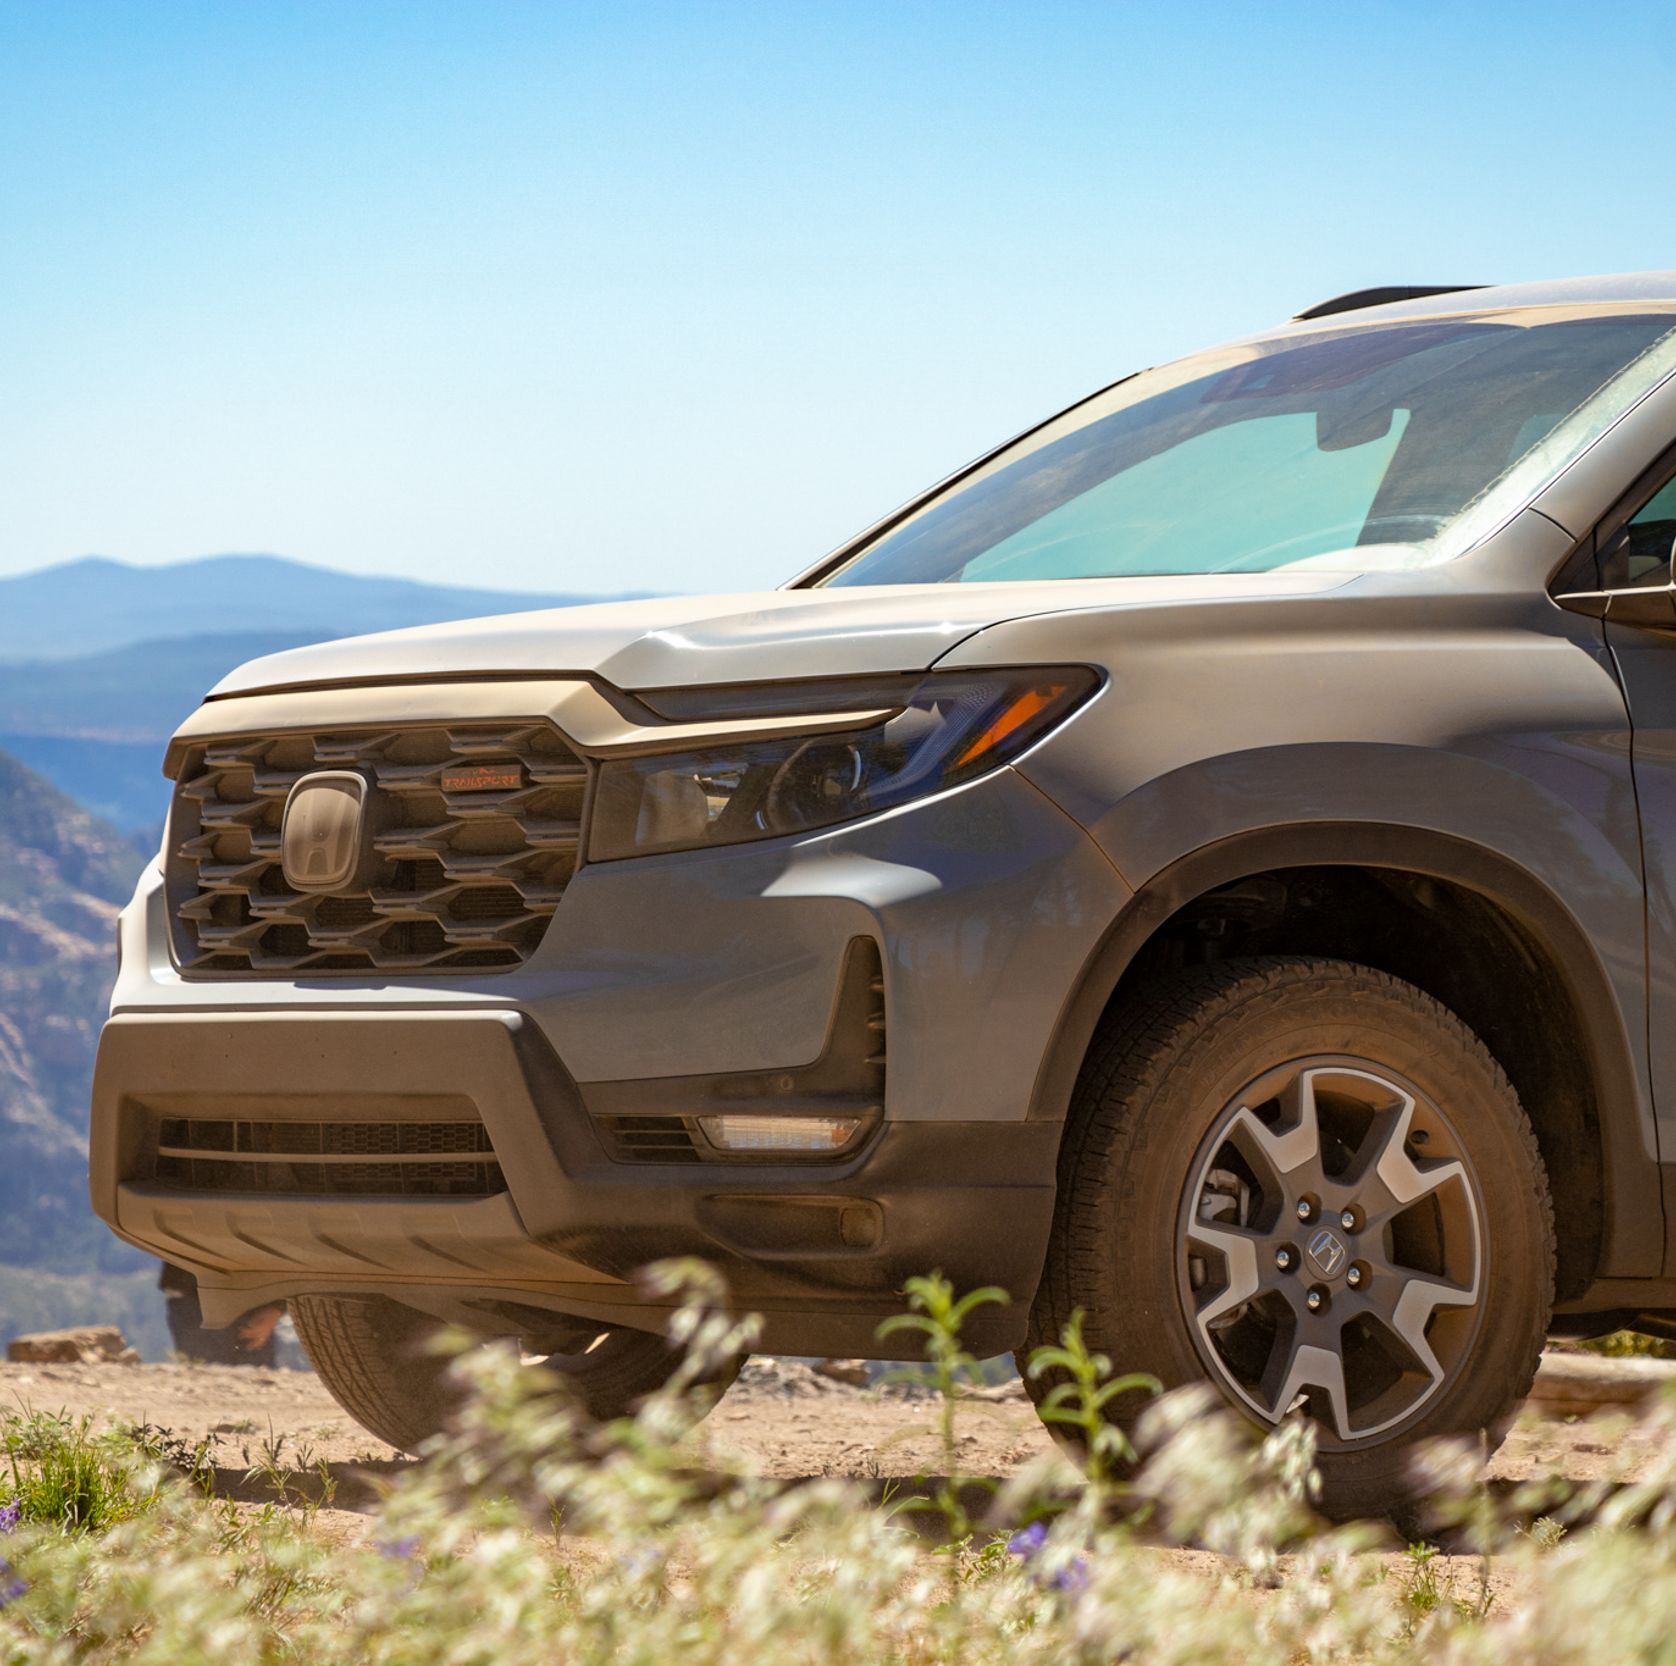 Honda's Passport Trailsport Is The Goldilocks Off-Roader You Should Really Know About